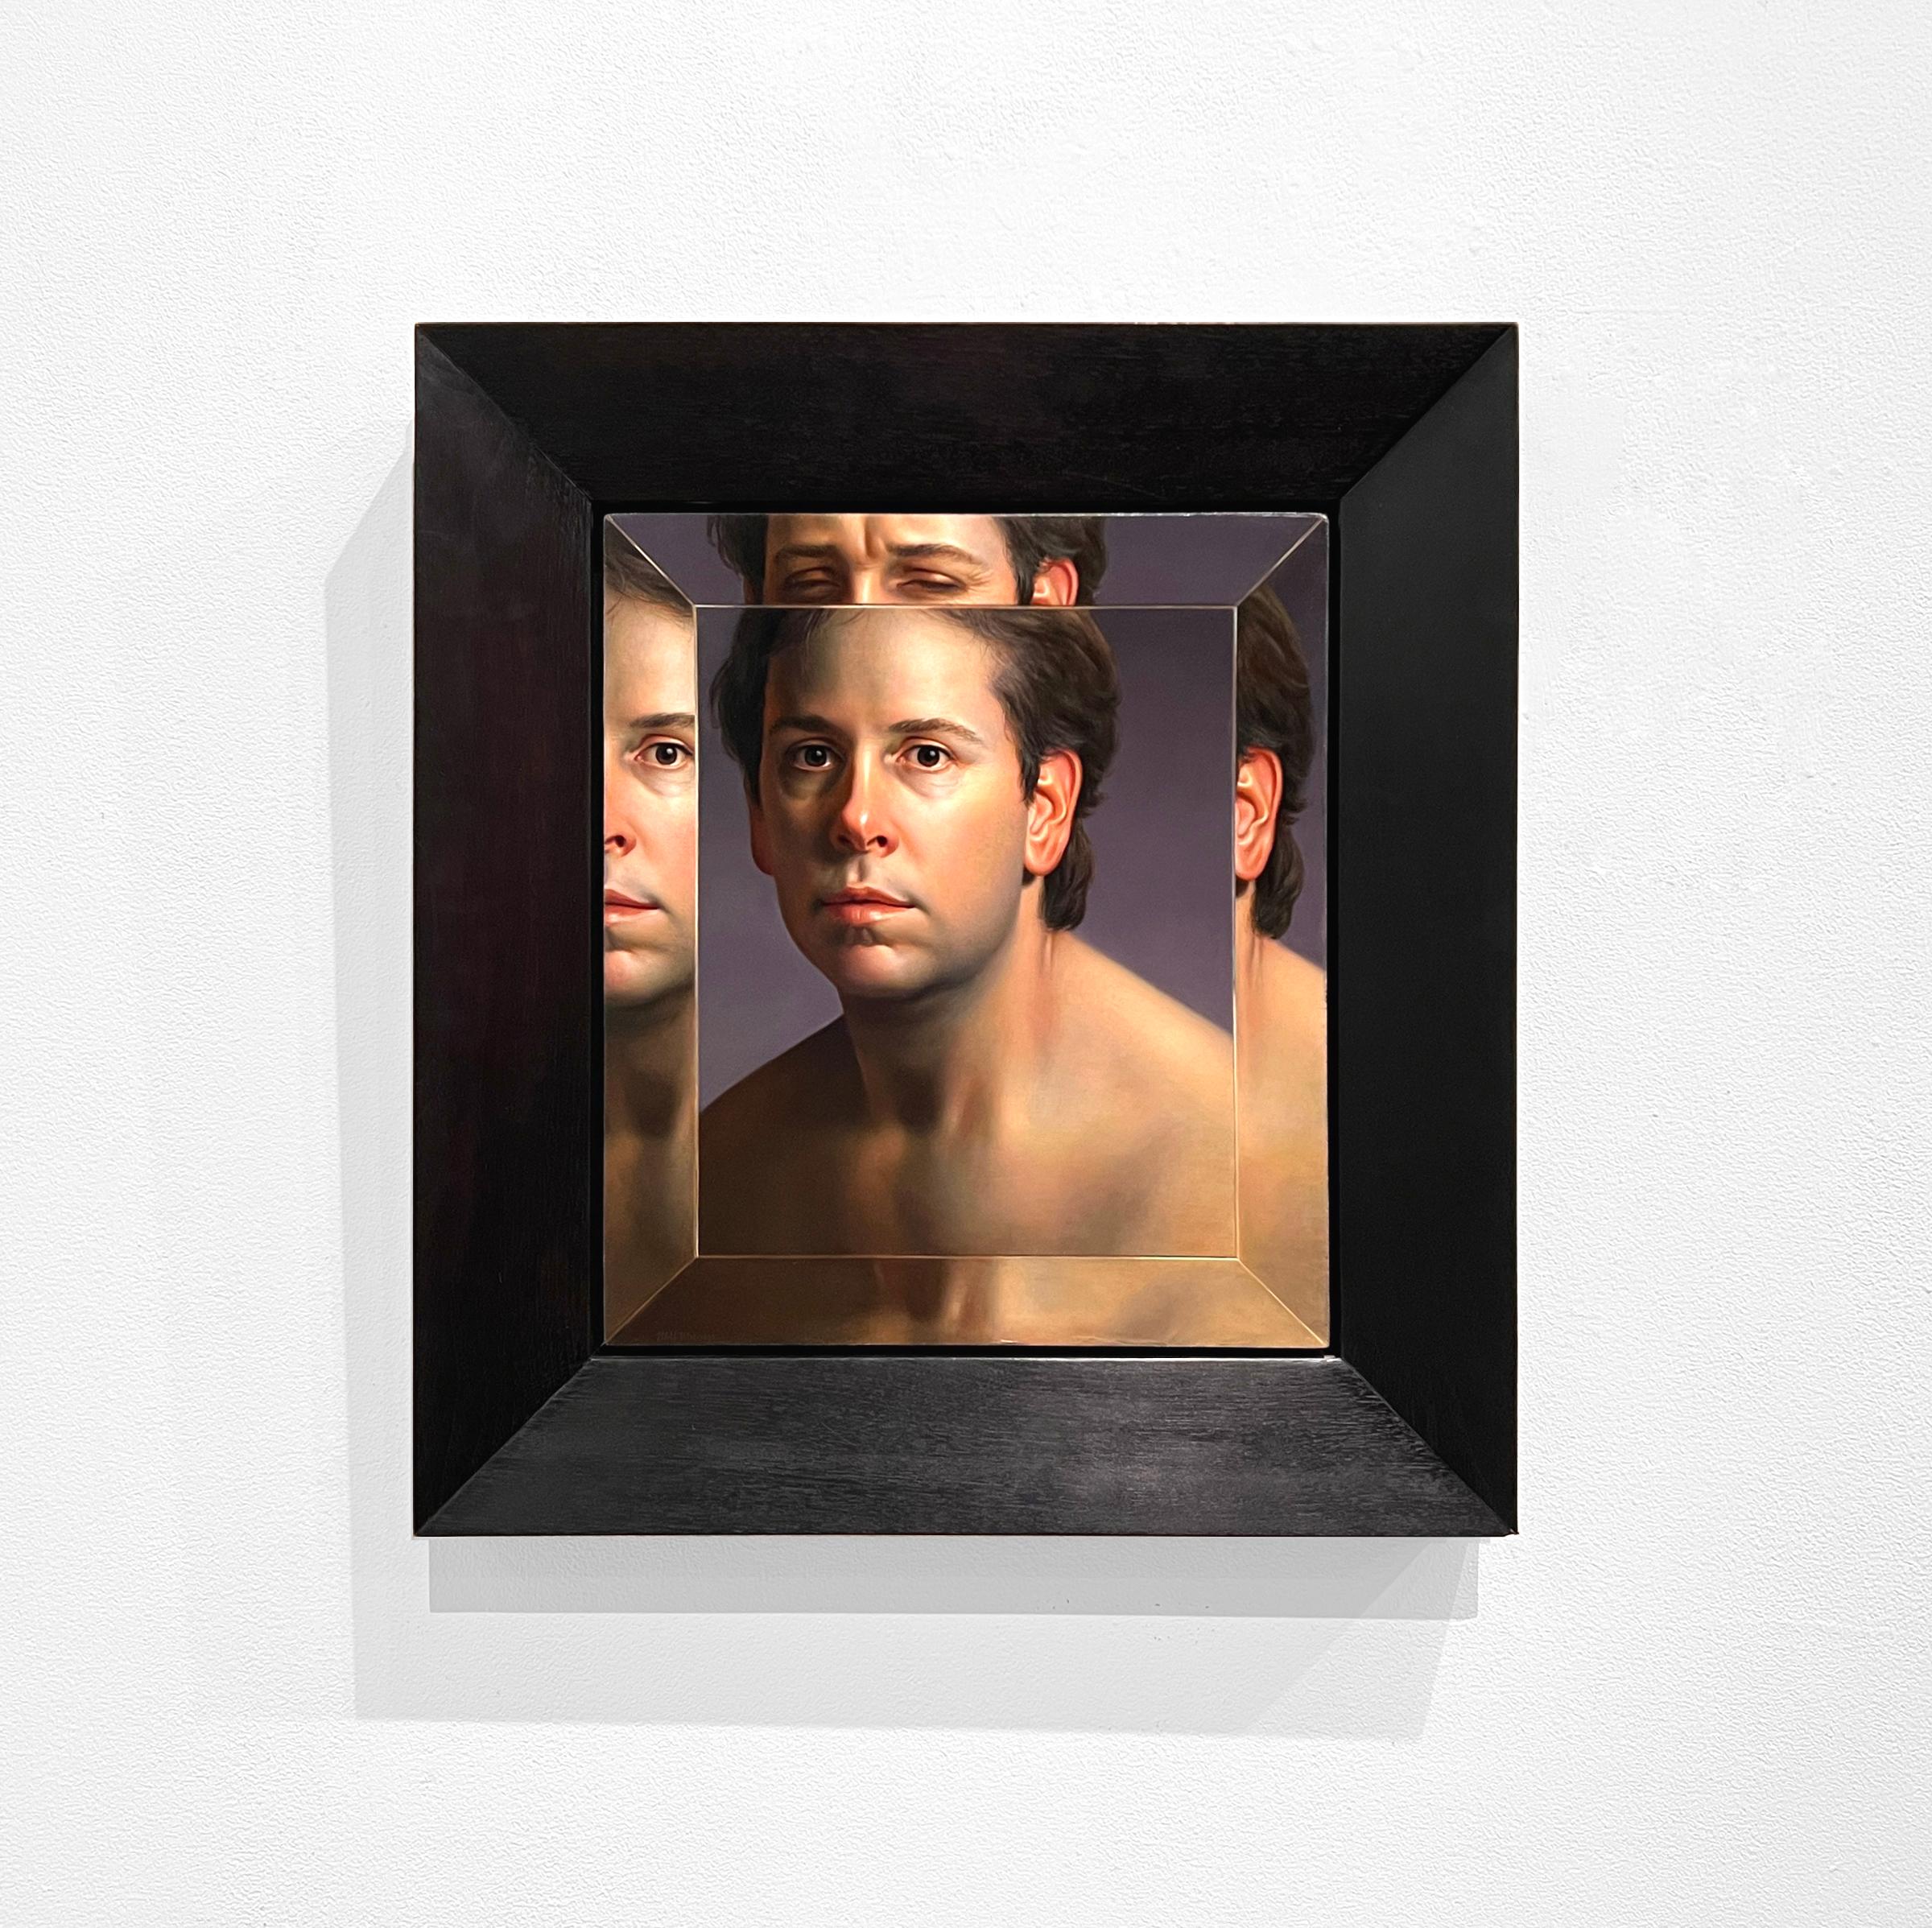 BEVELED - Contemporary Self Portrait / Photorealism / Trompe l'oeil - Painting by Will Wilson